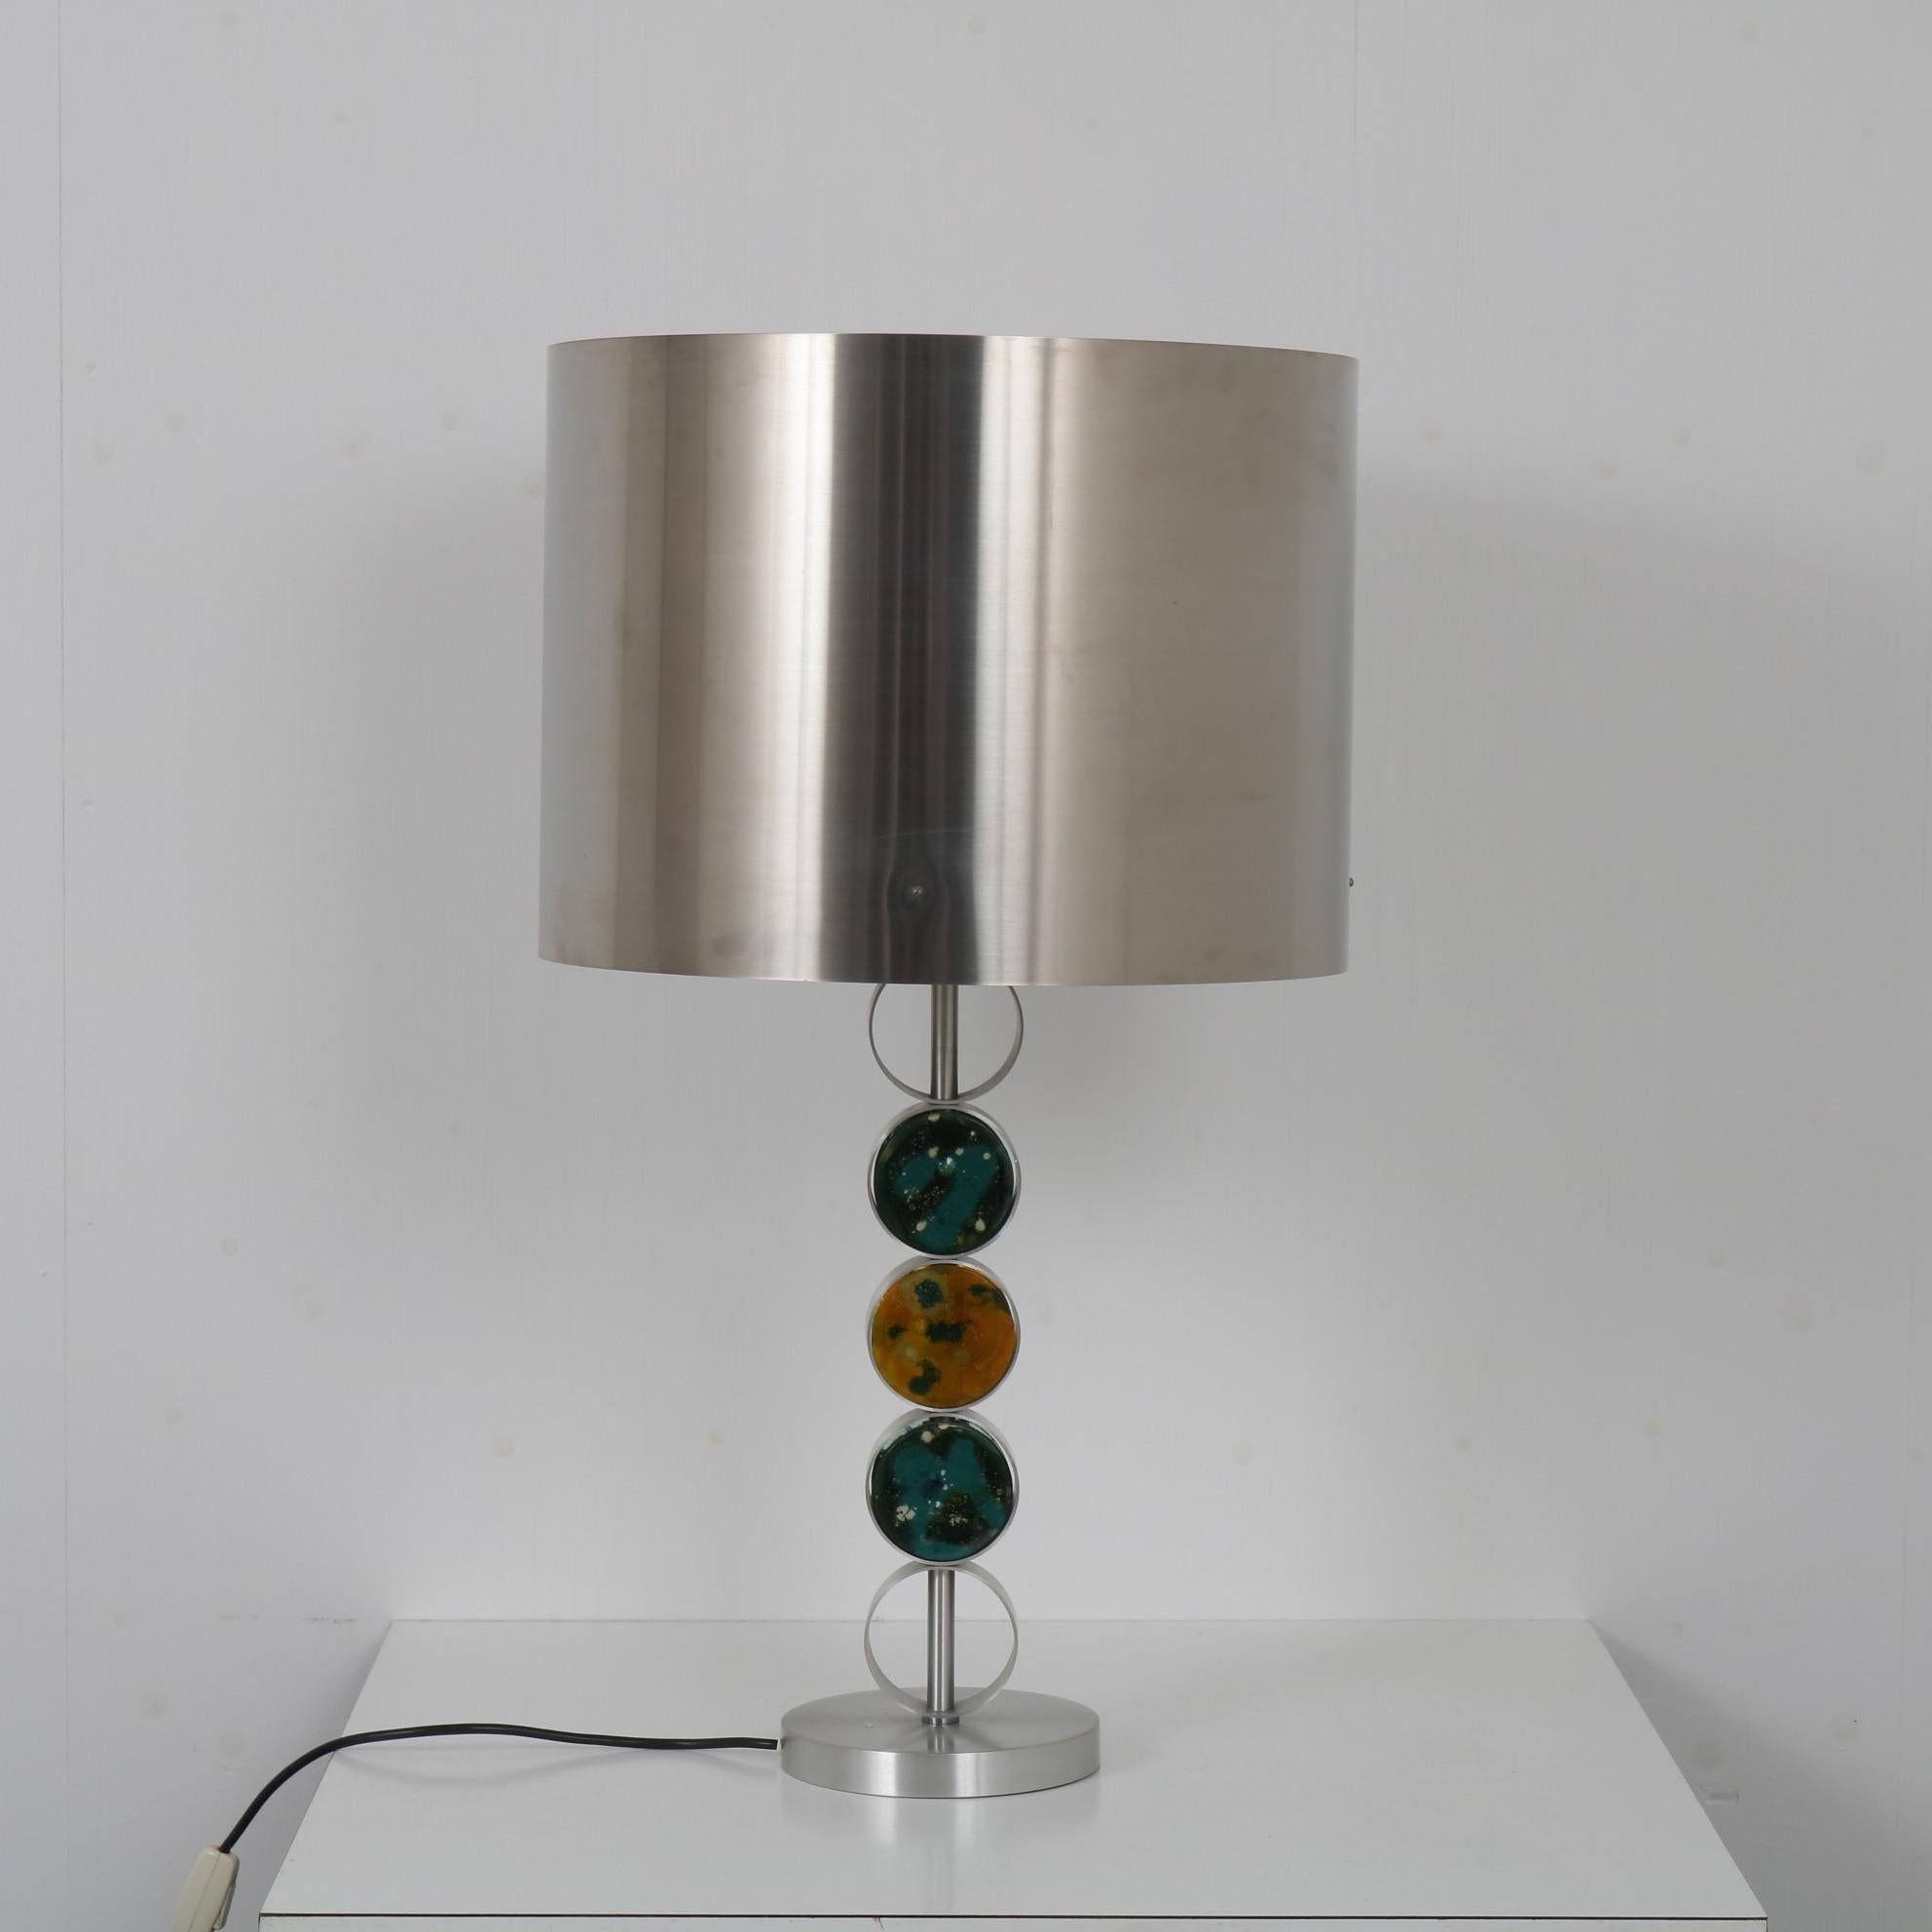 A wonderful table lamp designed by Nanny Still, manufactured by Raak around 1970.

The lamp is really nicely made of rounded shapes in chrome plataed metal. The round foot holds a cylinder arm and a cylinder shaped hood. The arm is decorated with